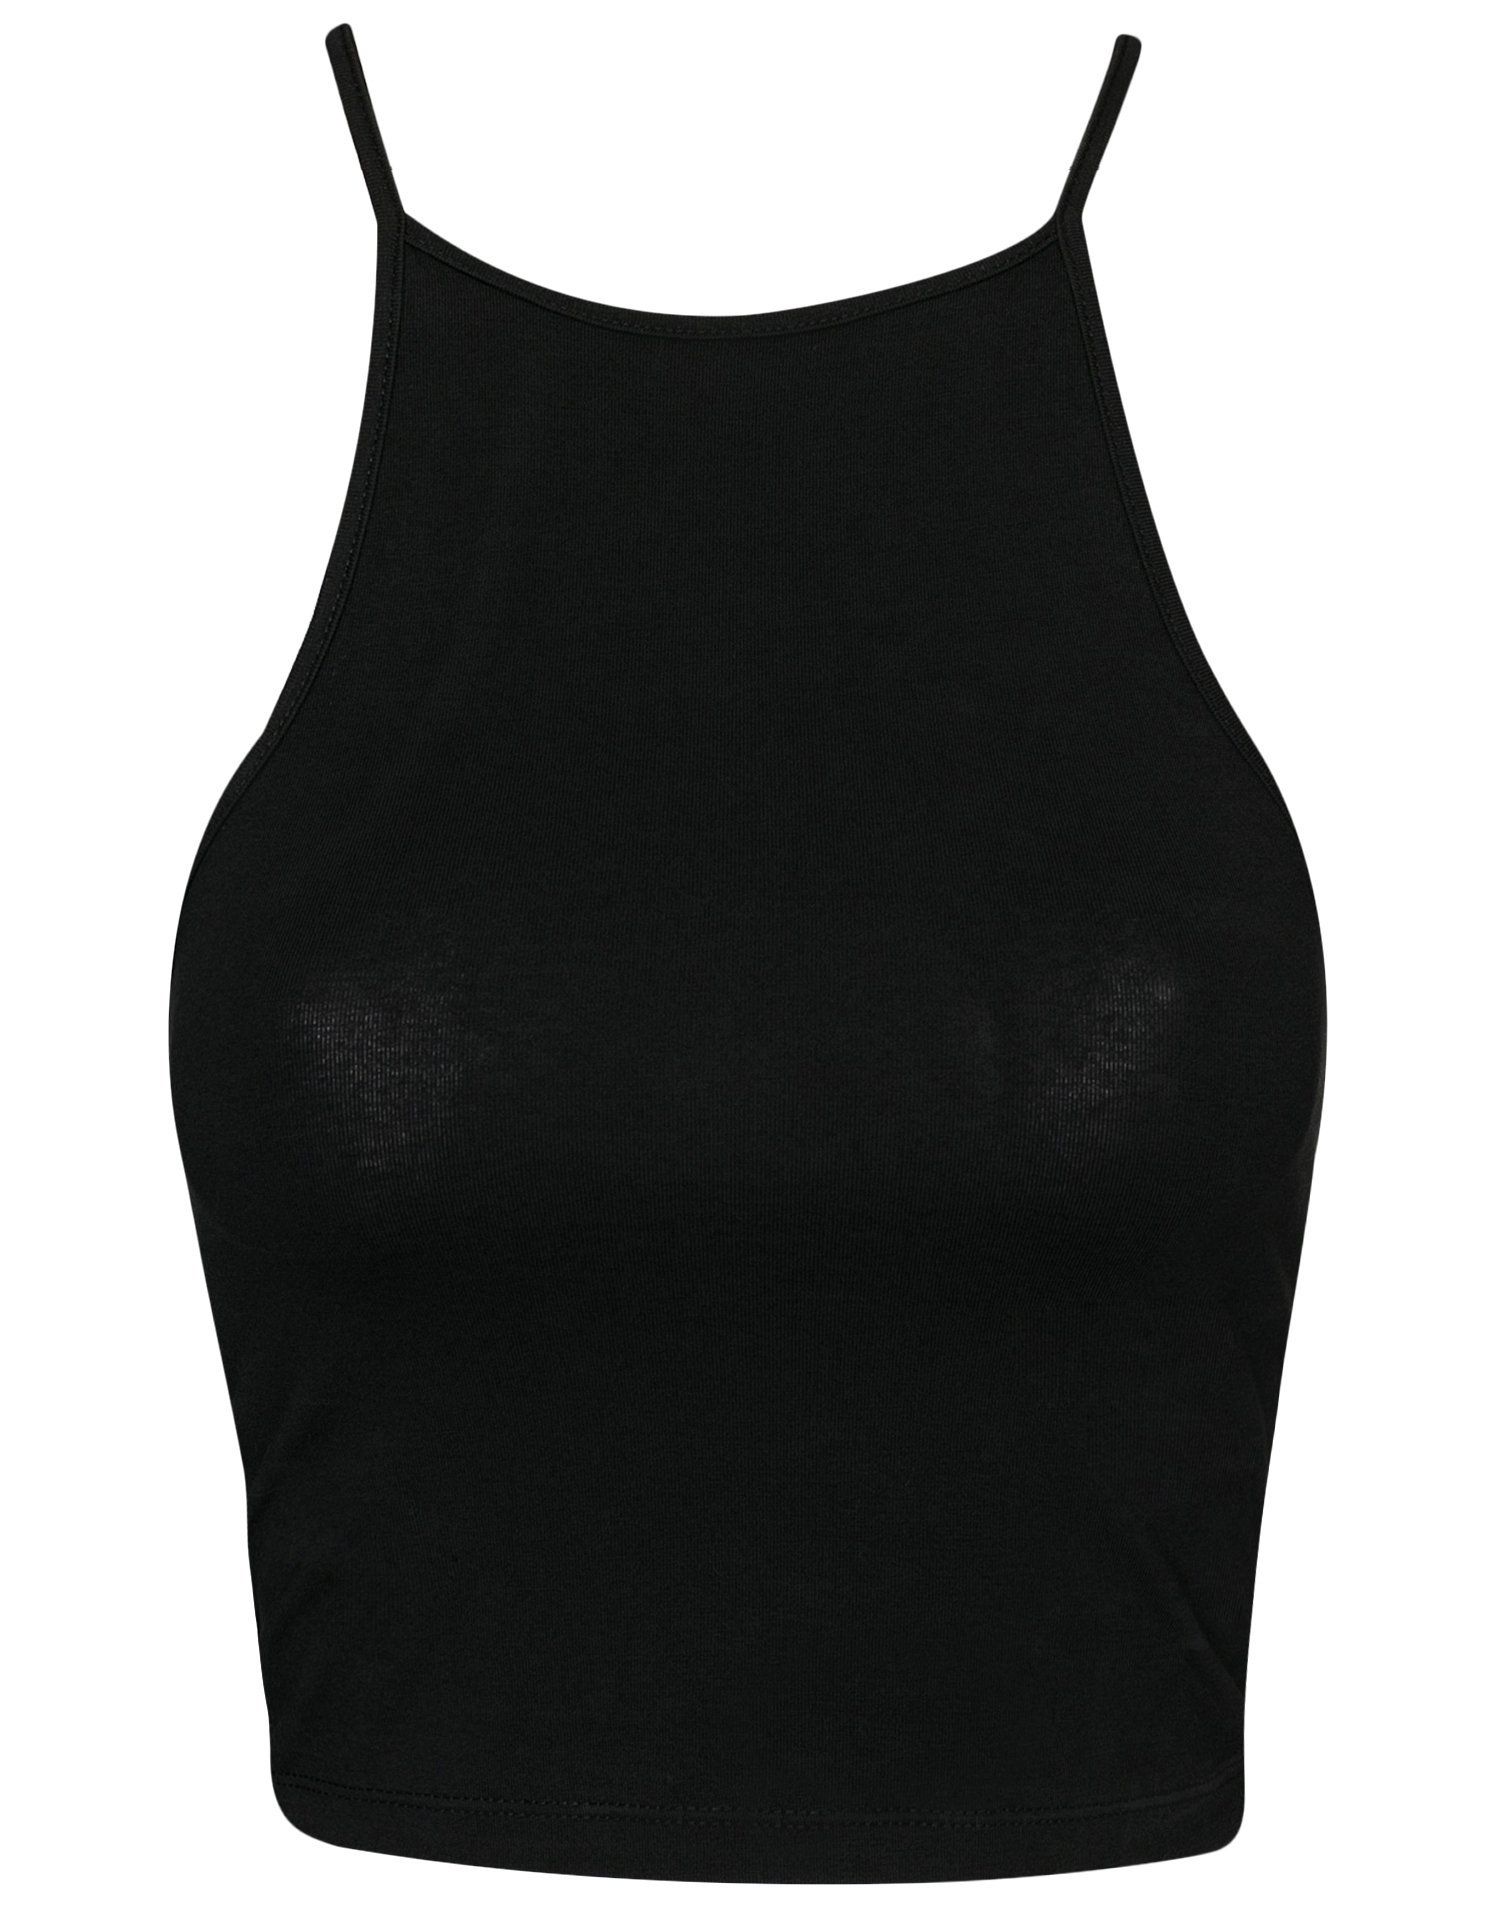 Tight Neckline Top - Nly Trend - Black - Tops - Clothing - Women ...